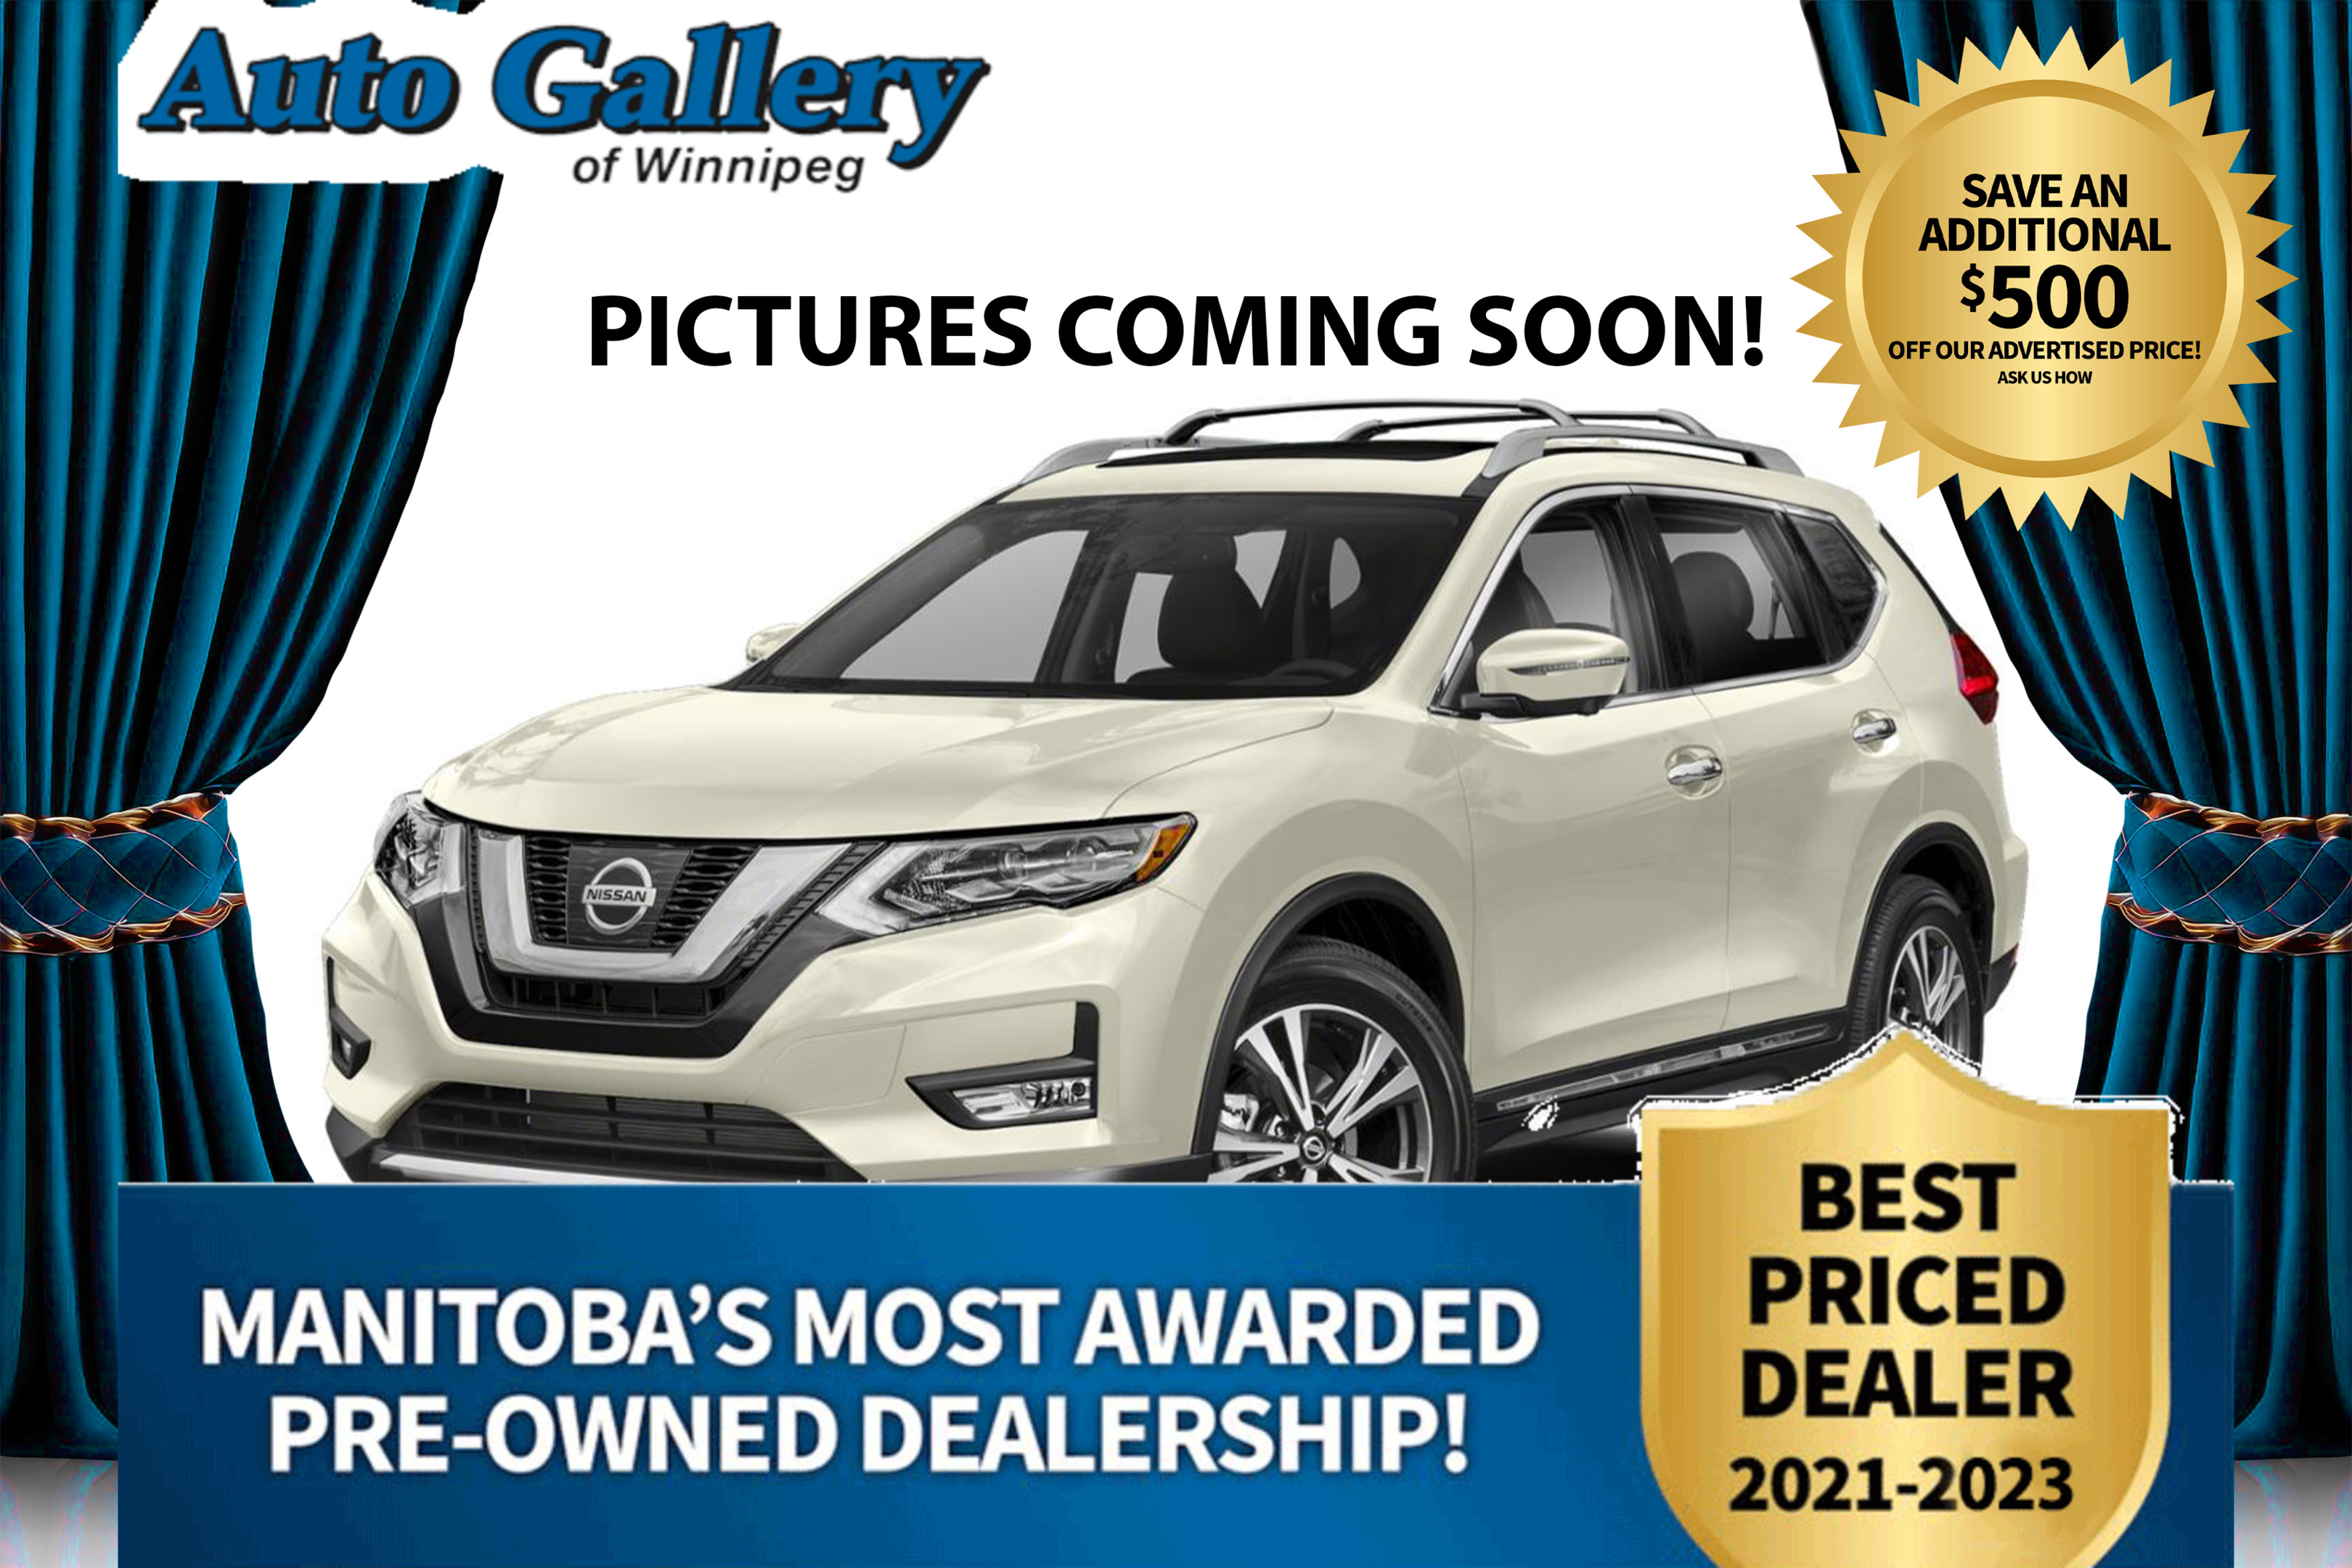 2018 Nissan Rogue AWD SL, PANORAMIC SUNROOF, REMOTE START, LEATHER